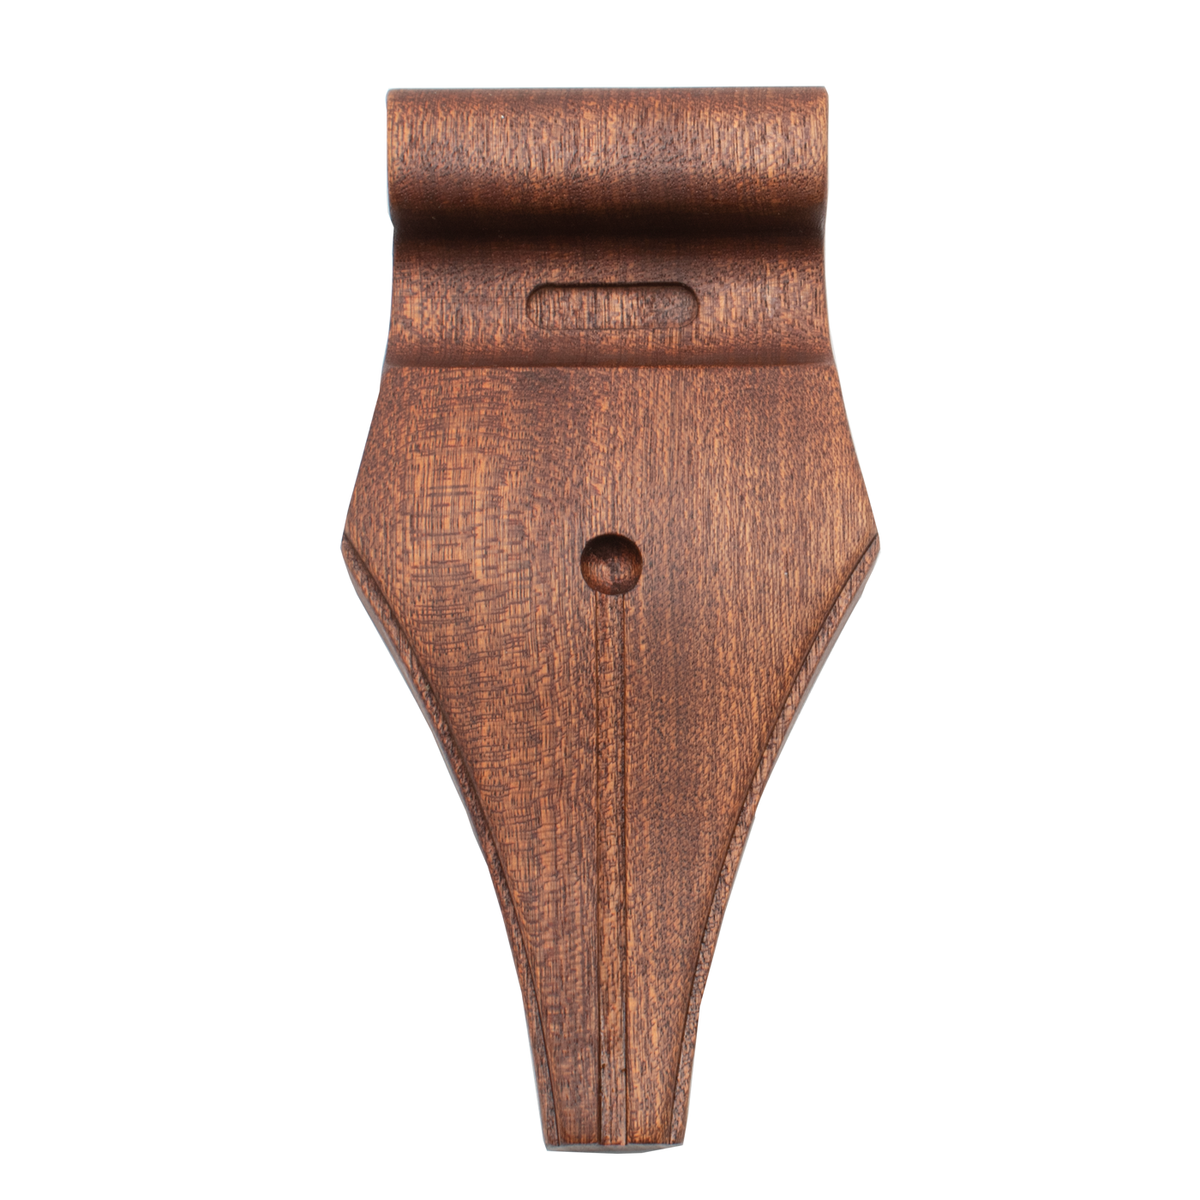 Galen Leather Co. The Nib Rest Wooden Pen Stand - Mahogany